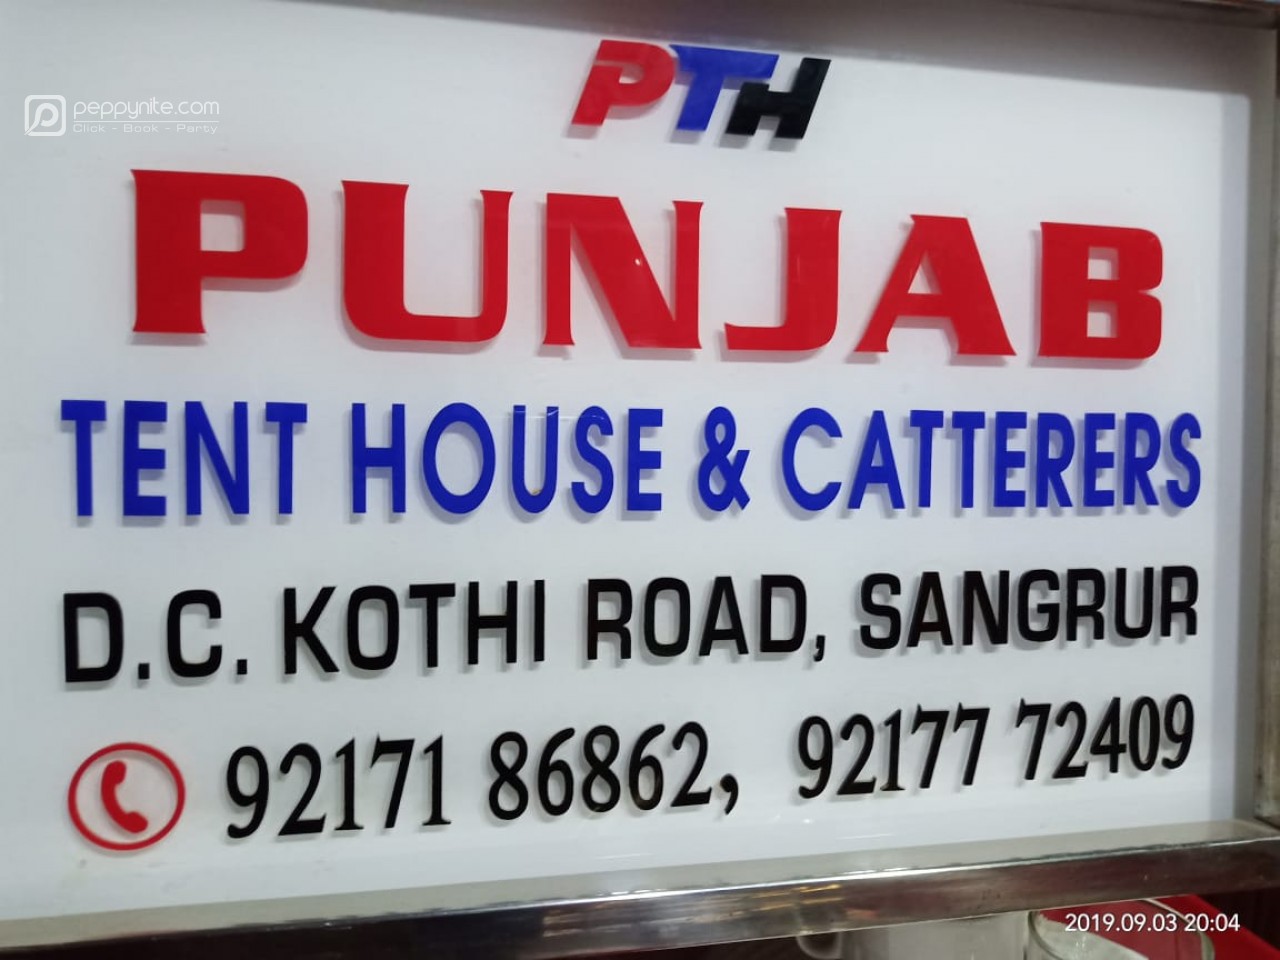 Punjab Catering And Tent House